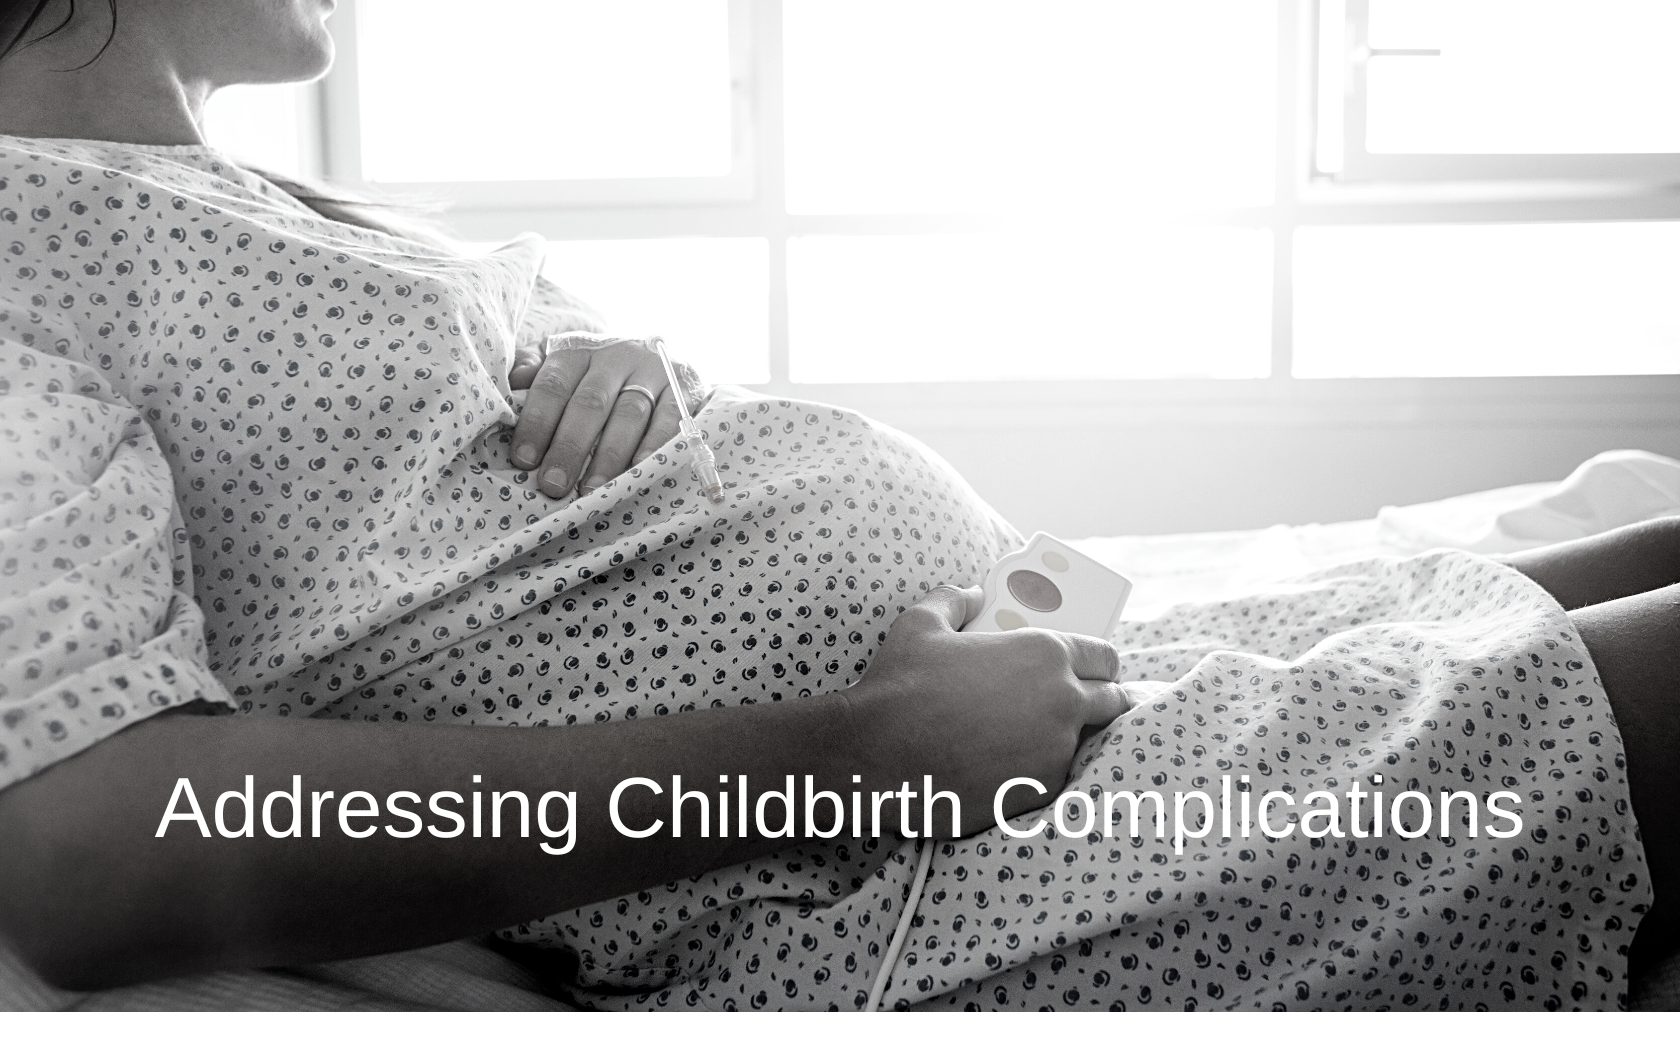 Mother faces childbirth complications.